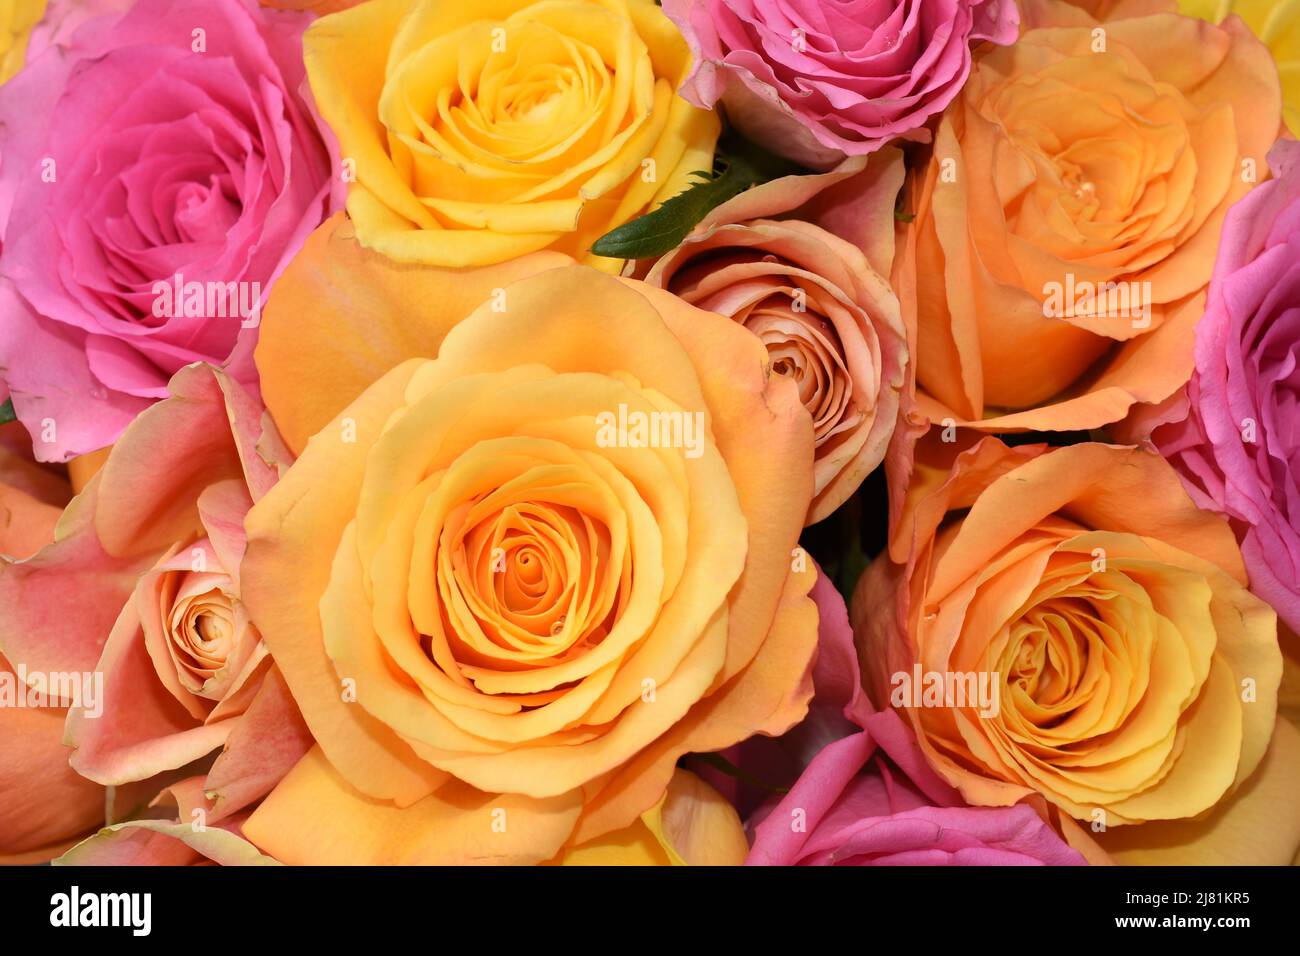 Close-up on bouquet of roses in yellow orange and pink colors Stock Photo